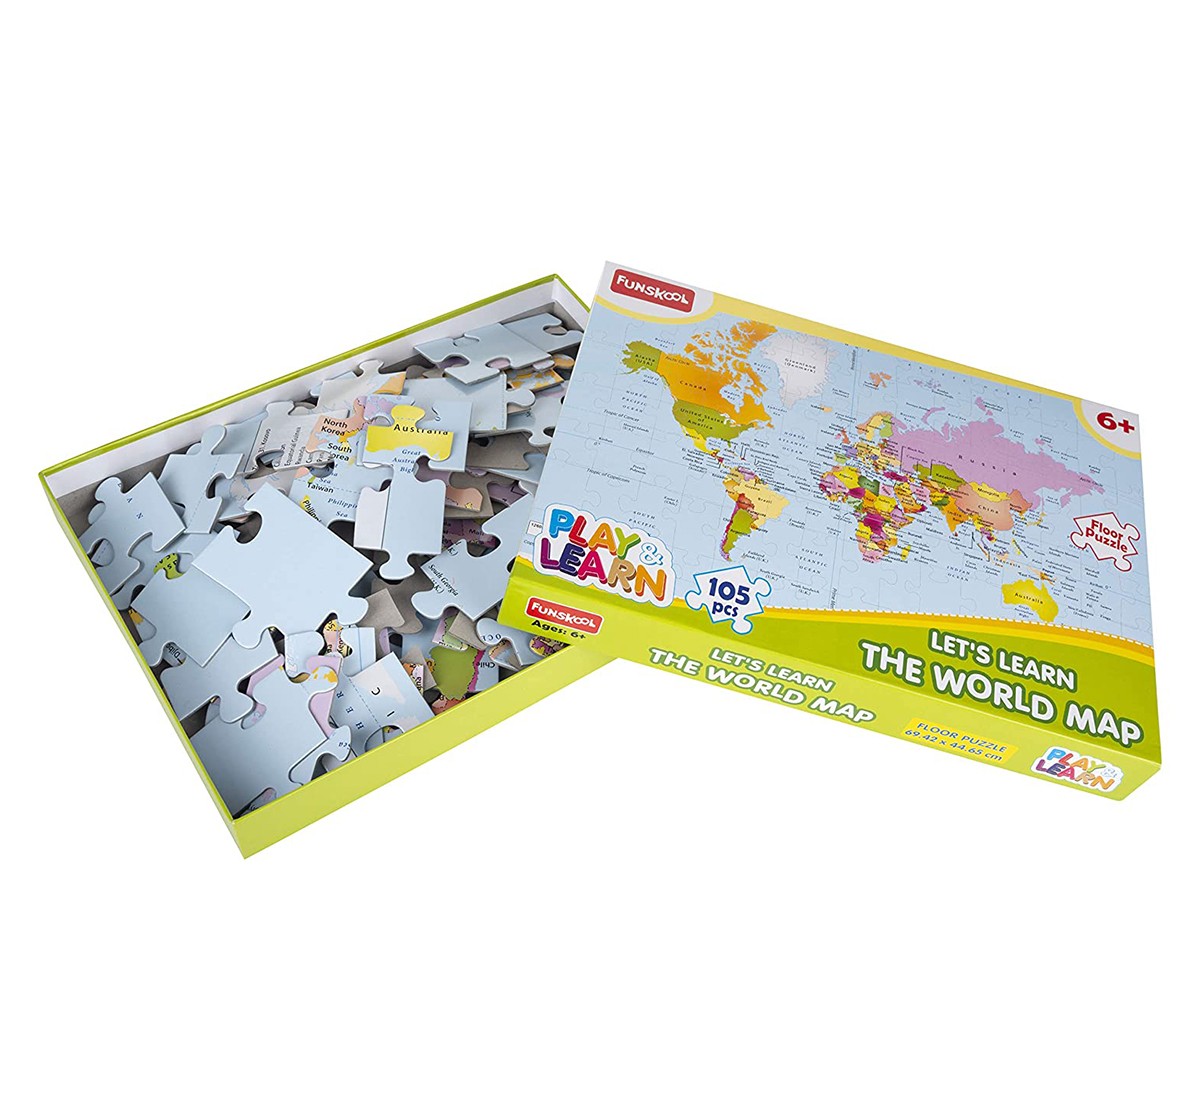 Funskool Play & Learn World Map Puzzle, Multicolor, 3Y+